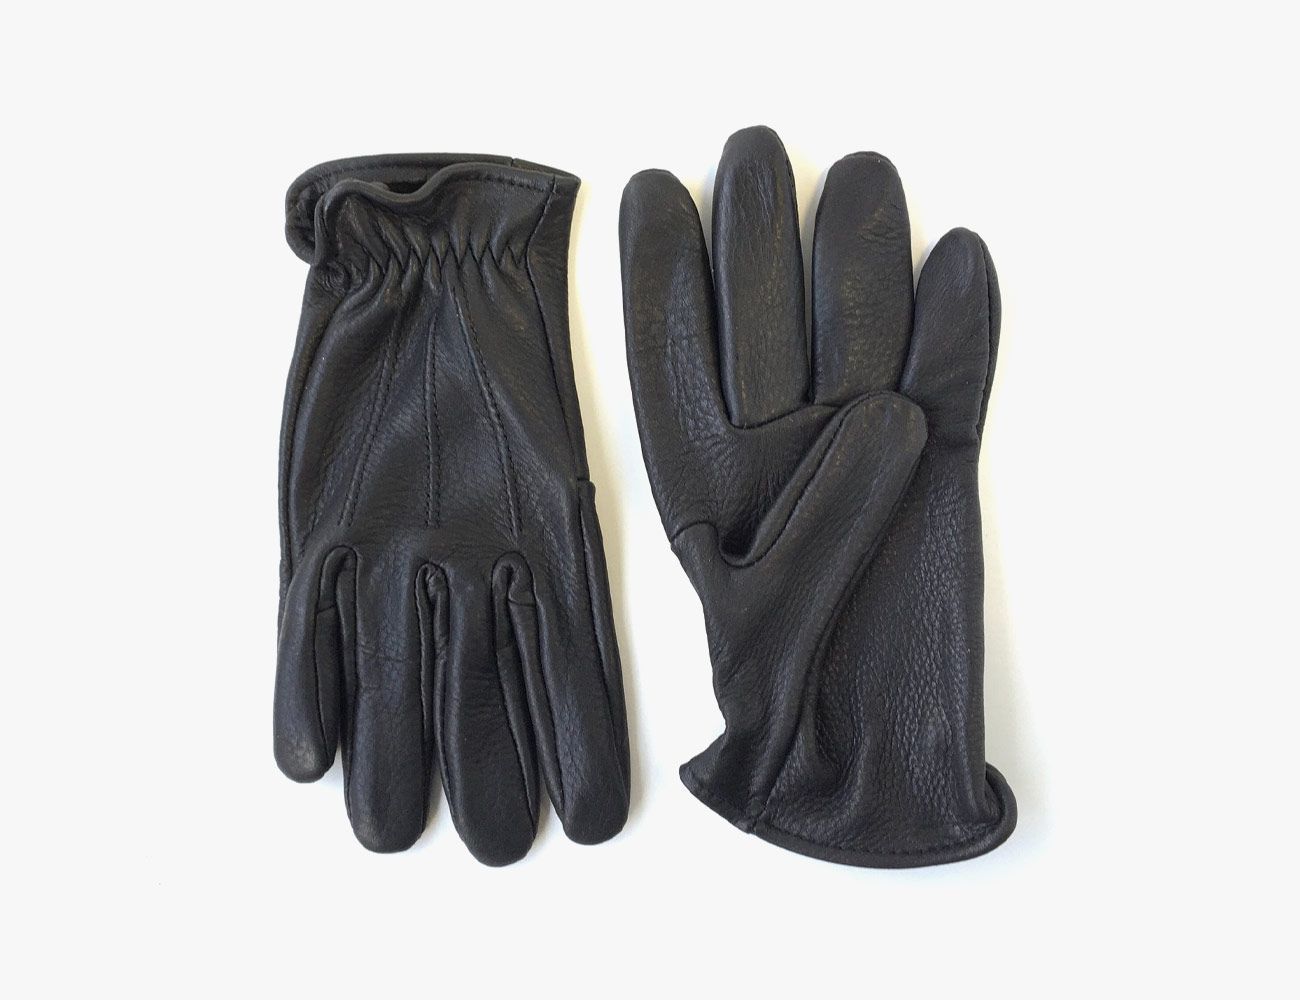 * Winter gloves lined warm Black leather gloves BNWT New Men's Leather Gloves 